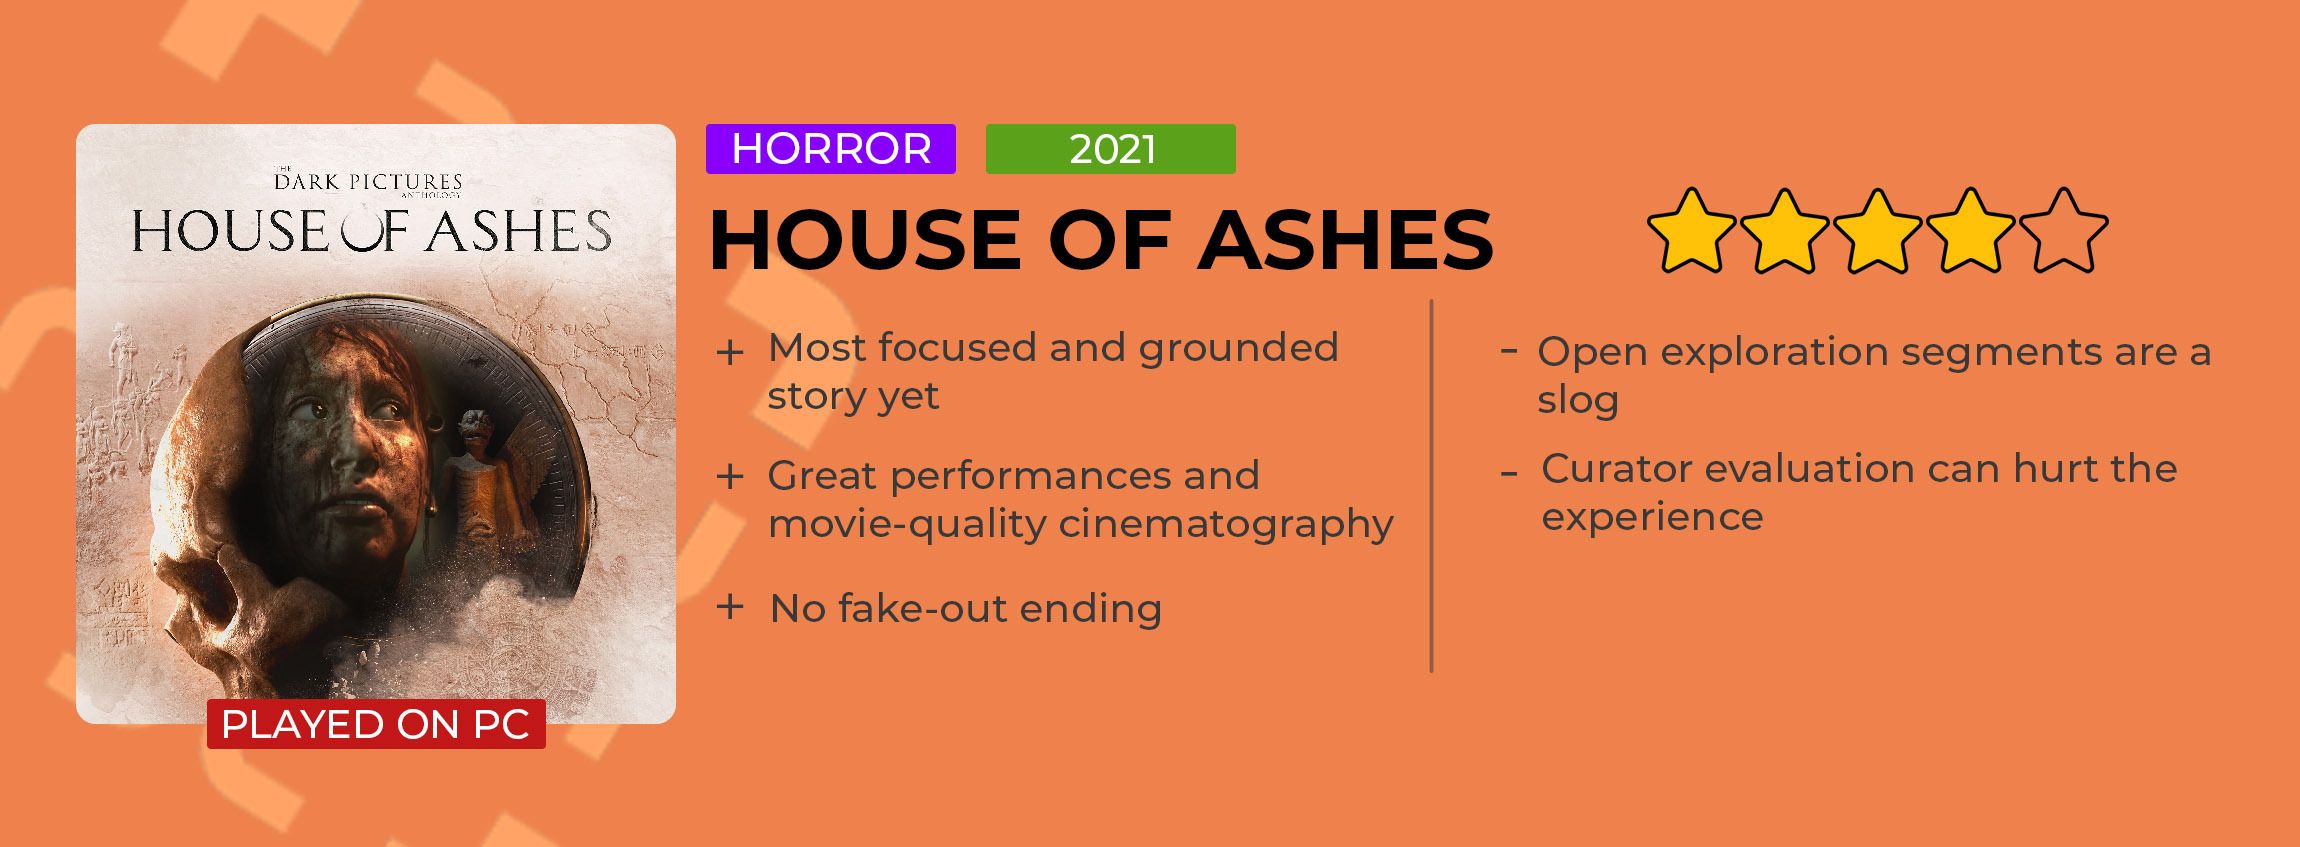 House of Ashes Review Card